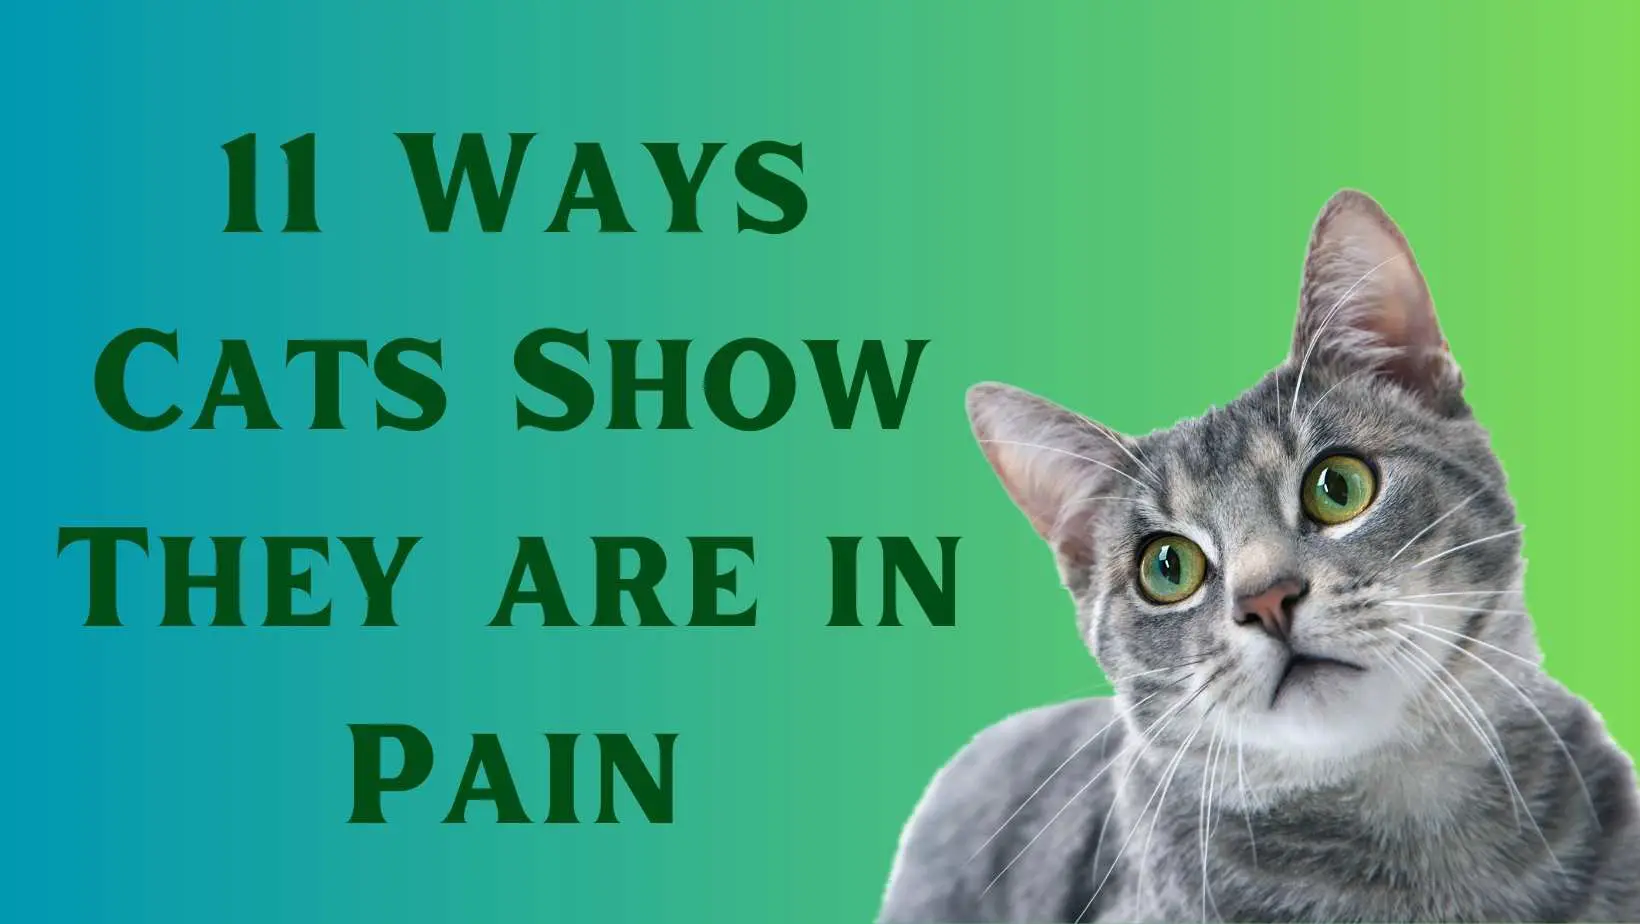 11 Ways Cats Show They are in Pain